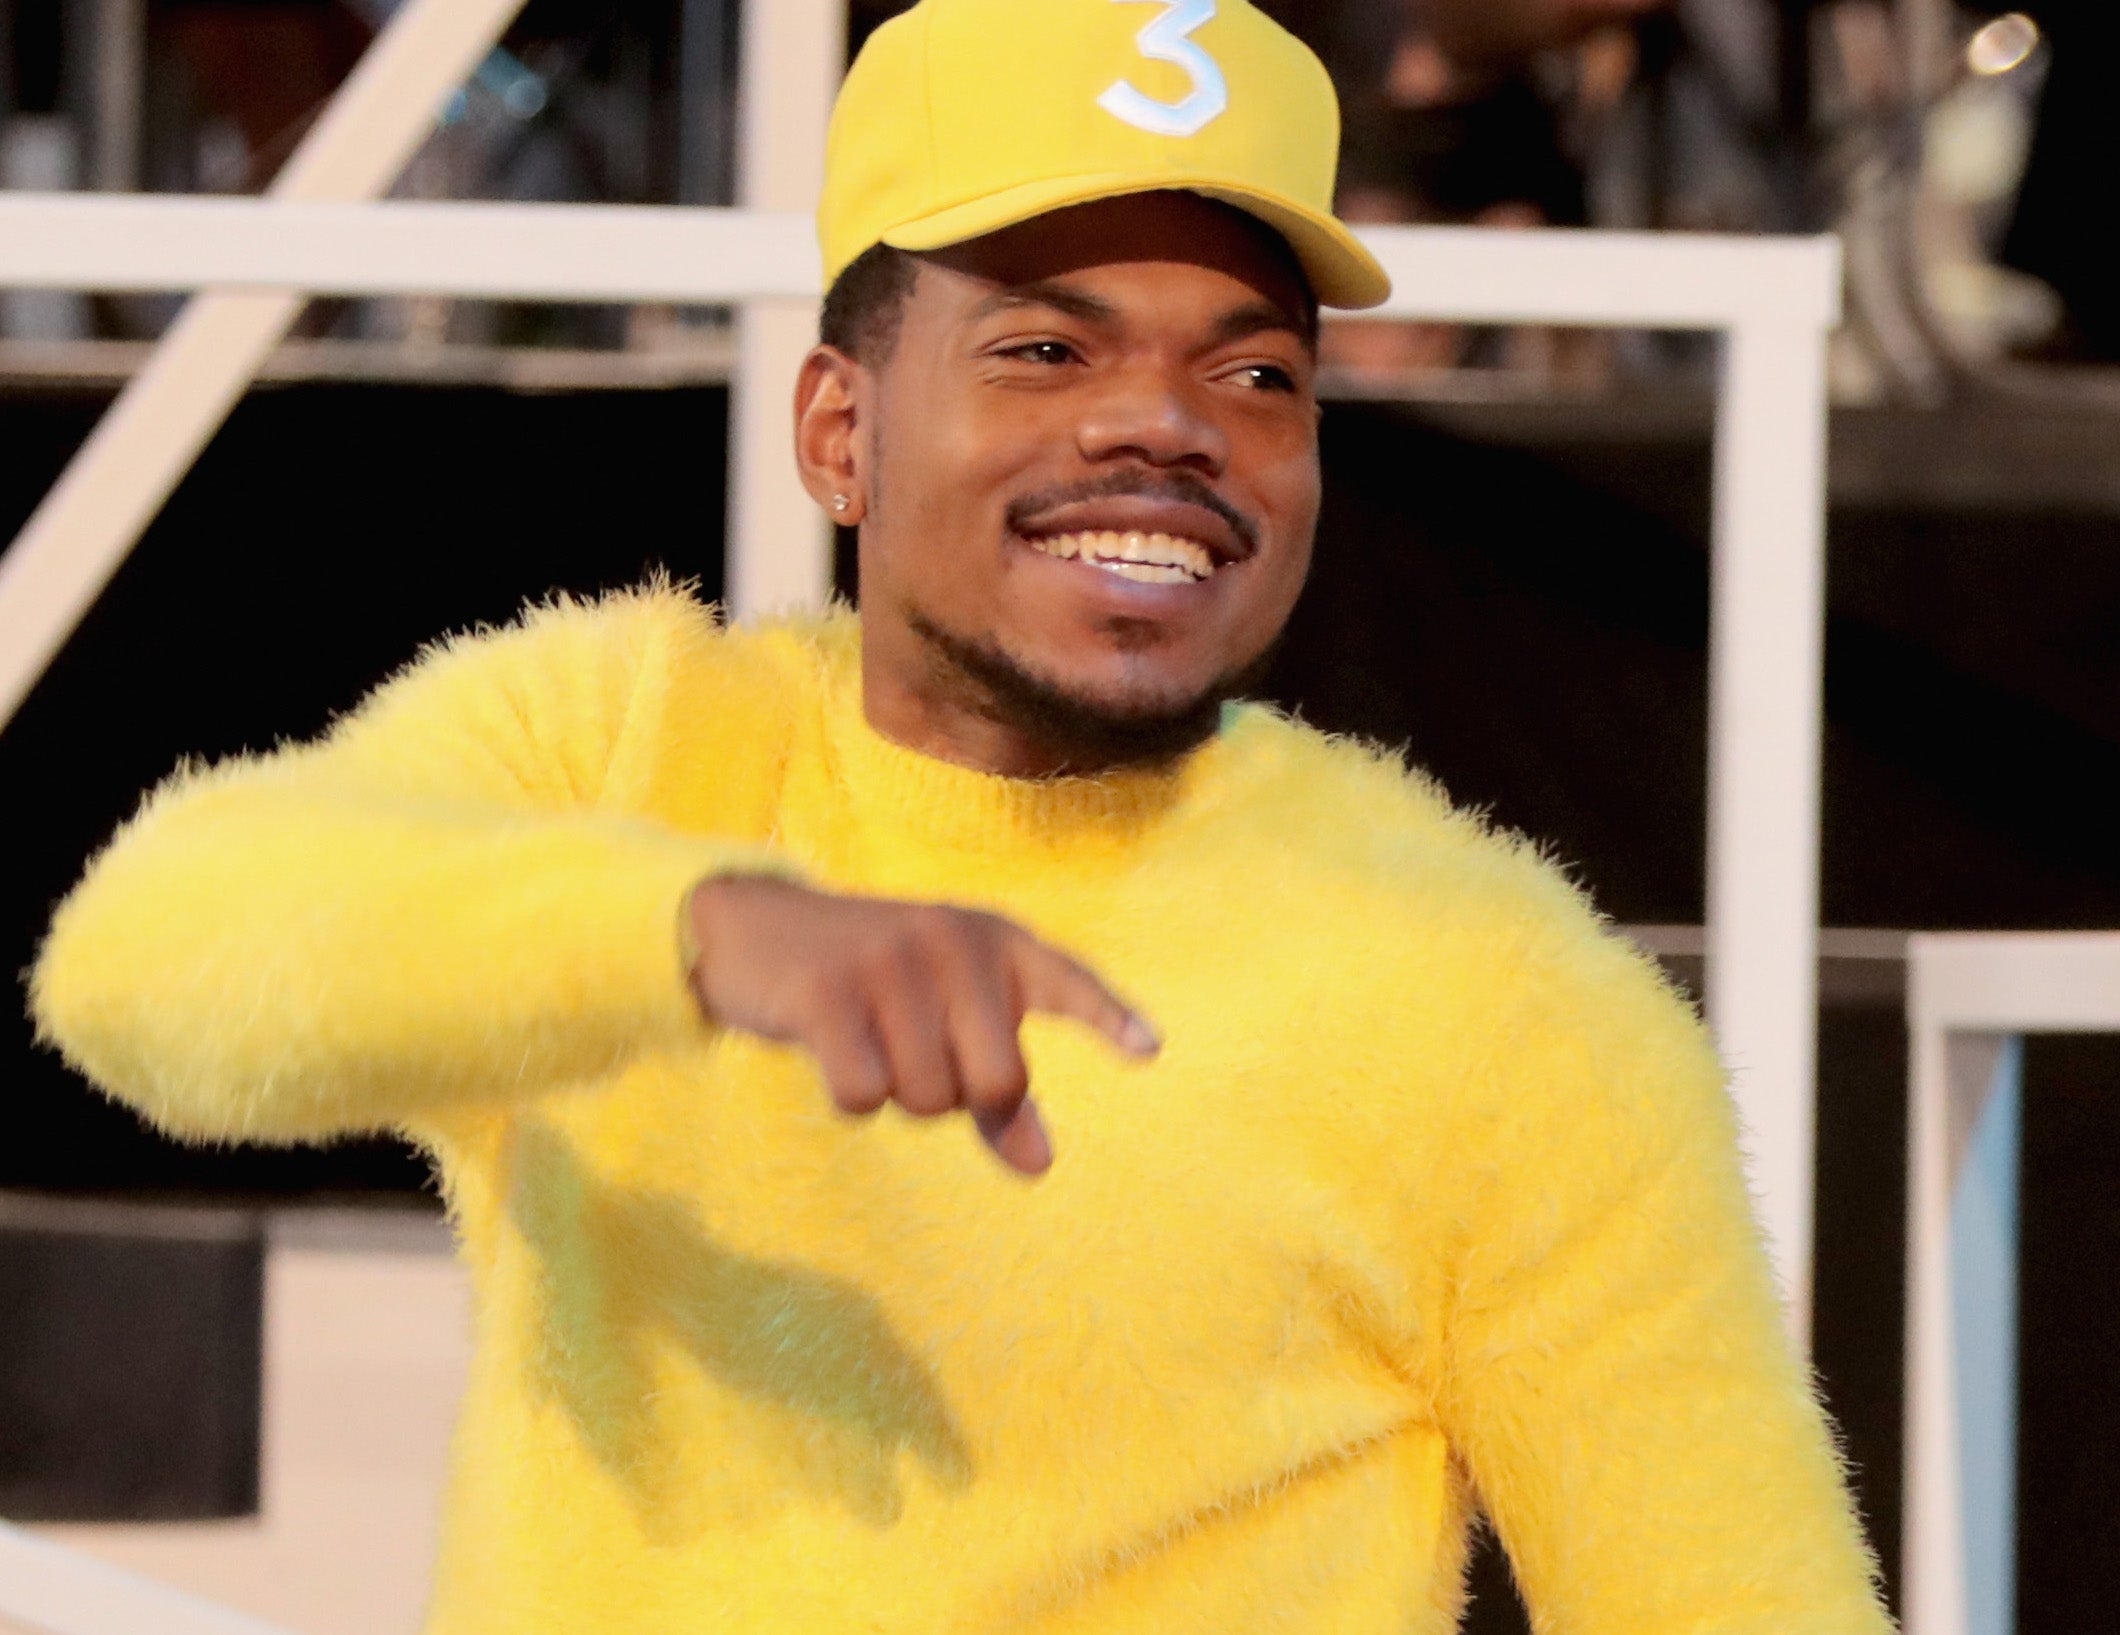 Chance The Rapper Is Grilling Chicken for Charity
